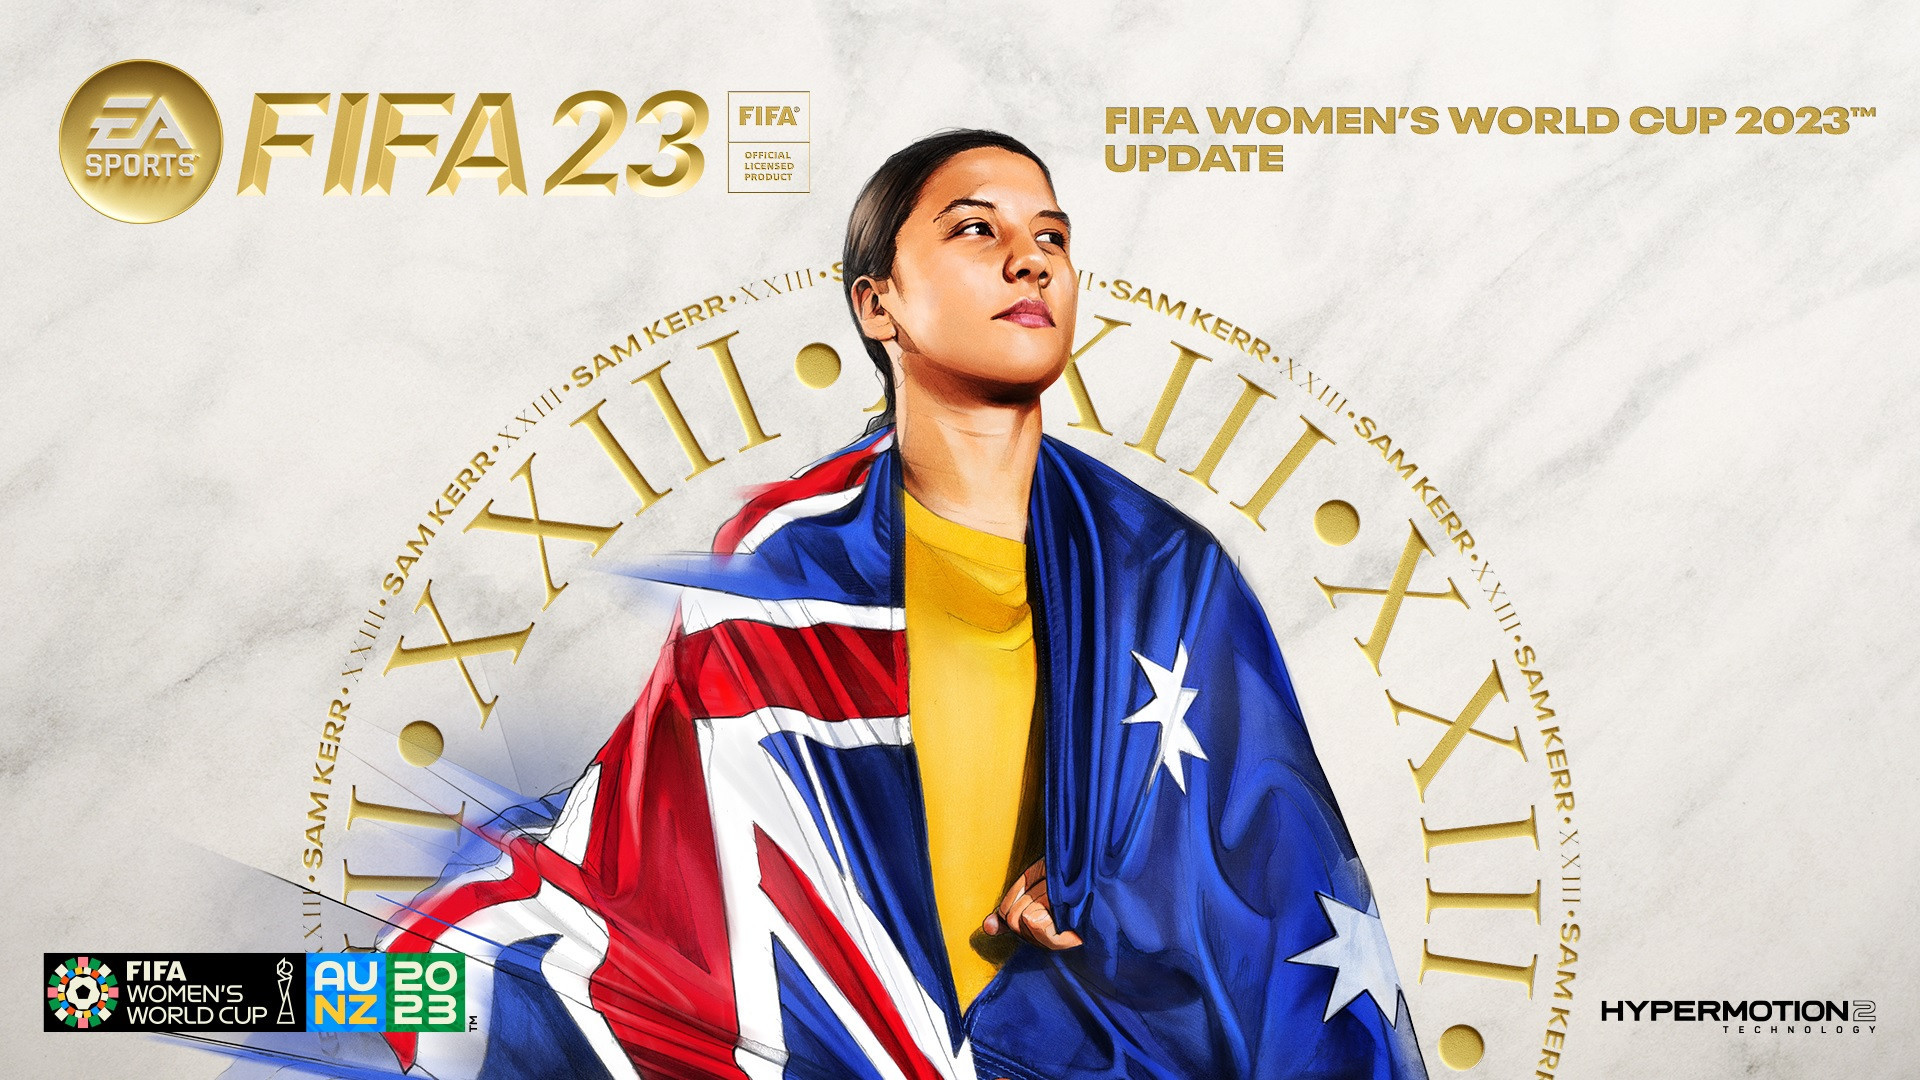 FIFA Women's World Cup 2023 - The FIFA experience